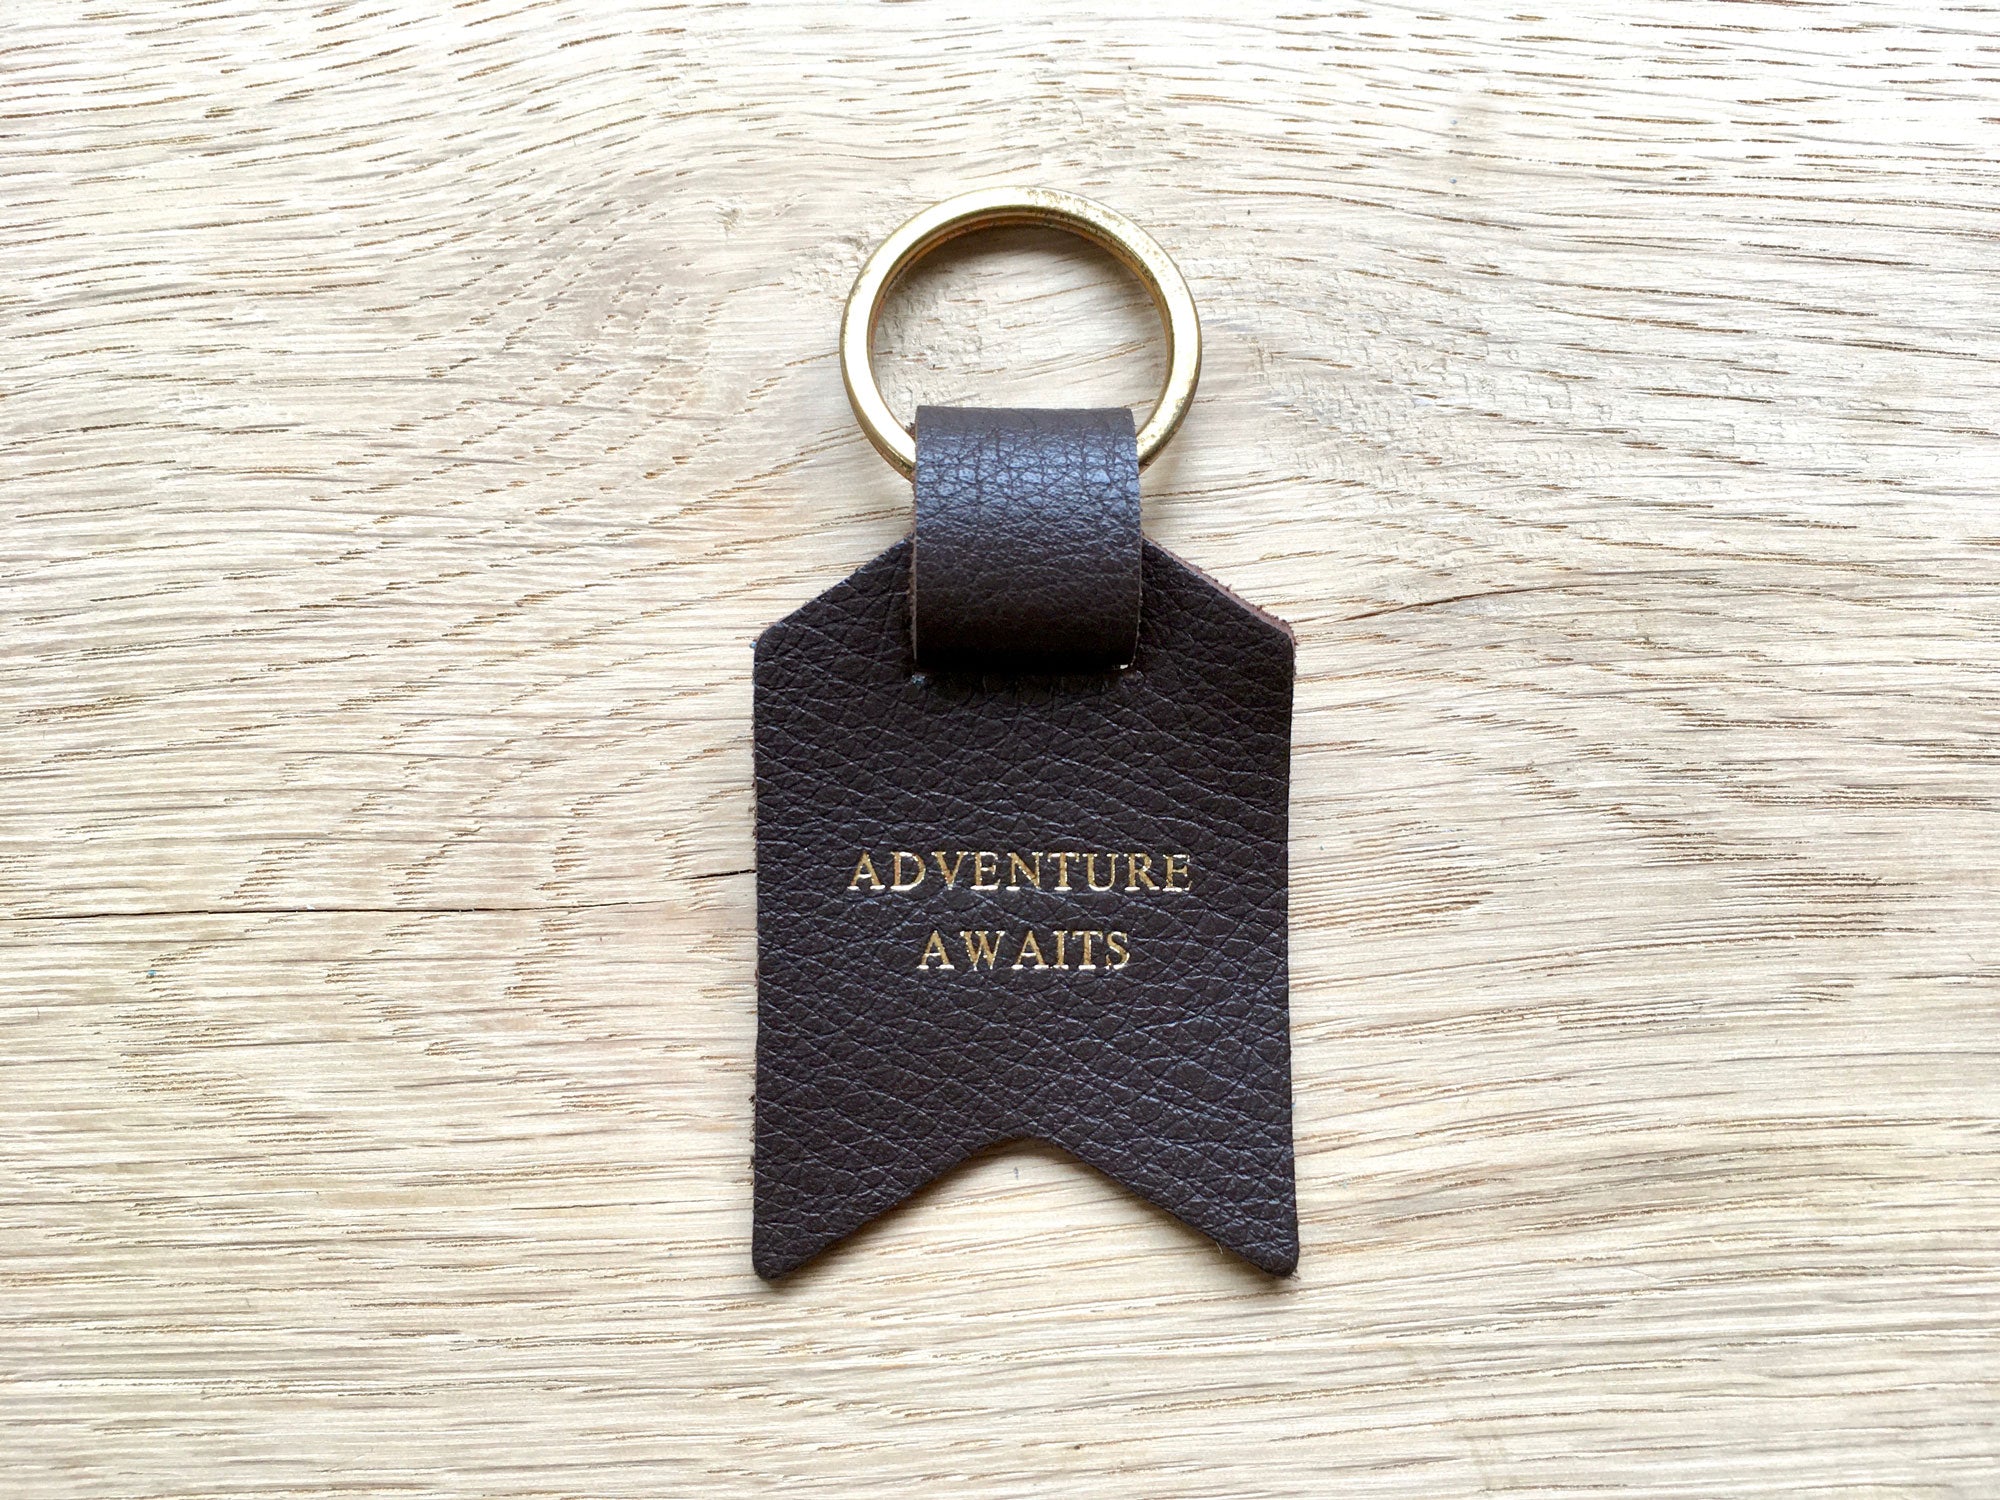 Also available – Adventure Awaits, Dark brown leather keyring